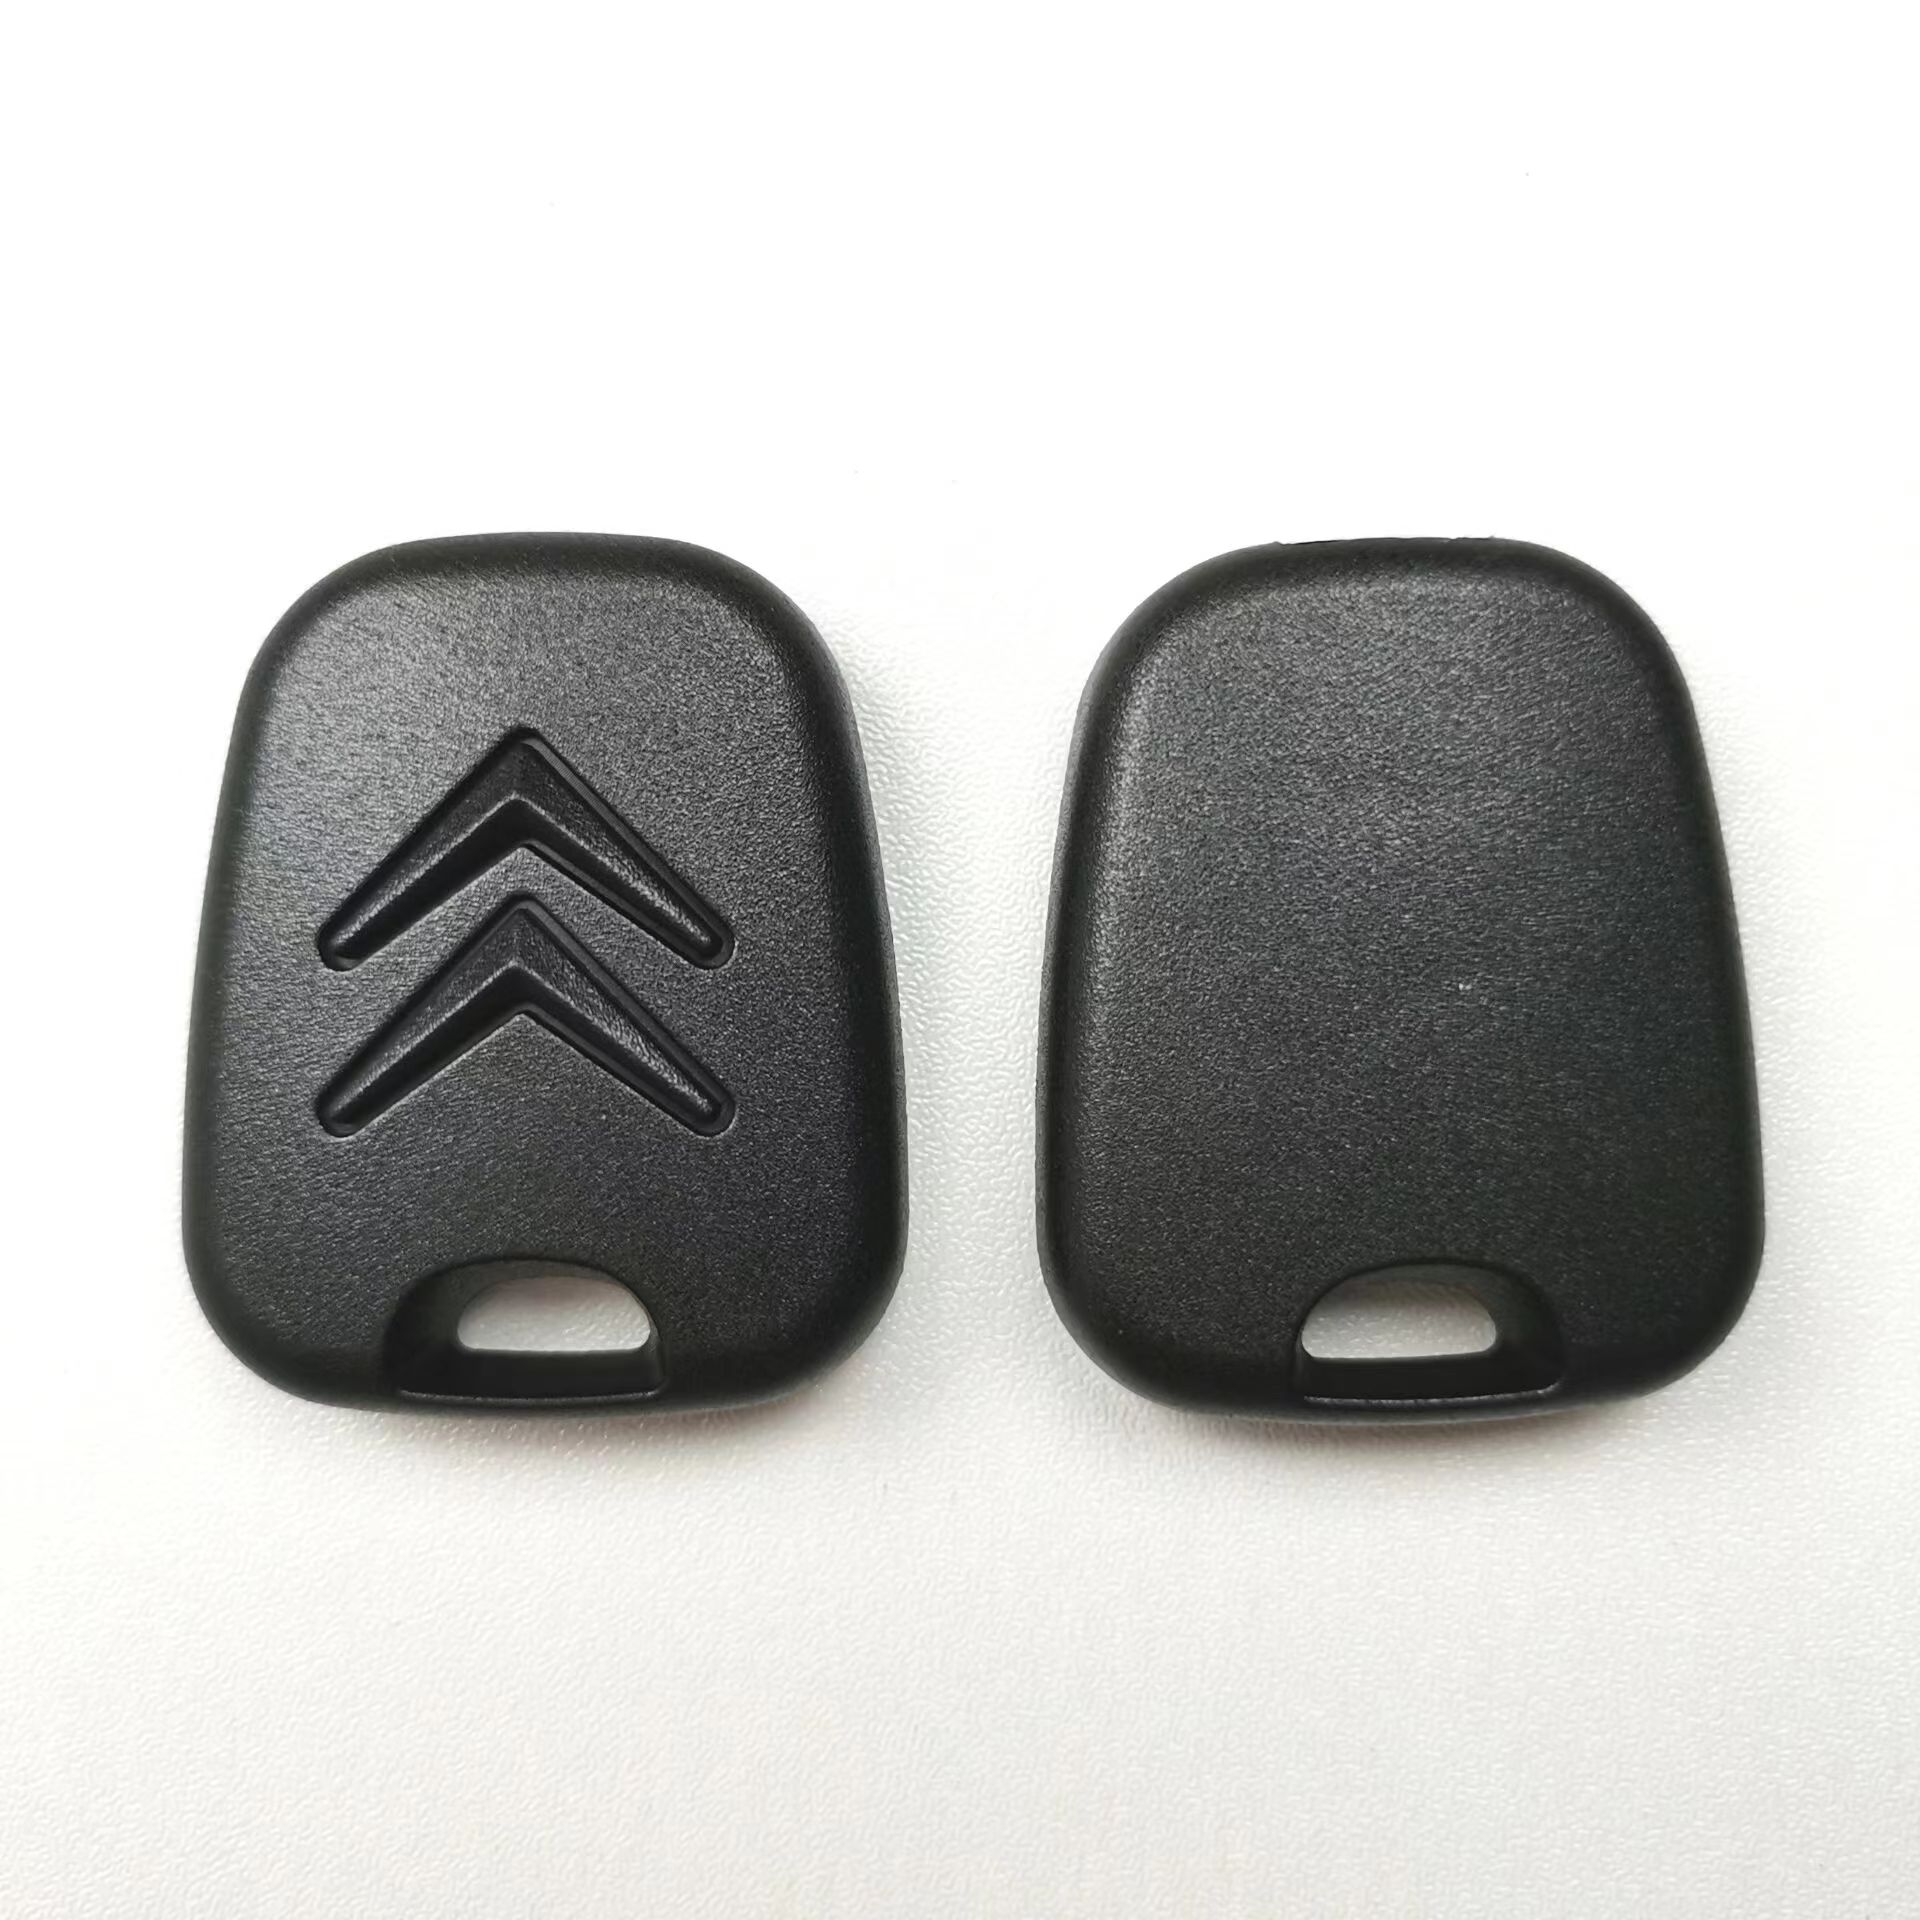 Transponder Car Key Shell Fob For Citroen C2 C3 C4 without blade suit for SX9 blade 